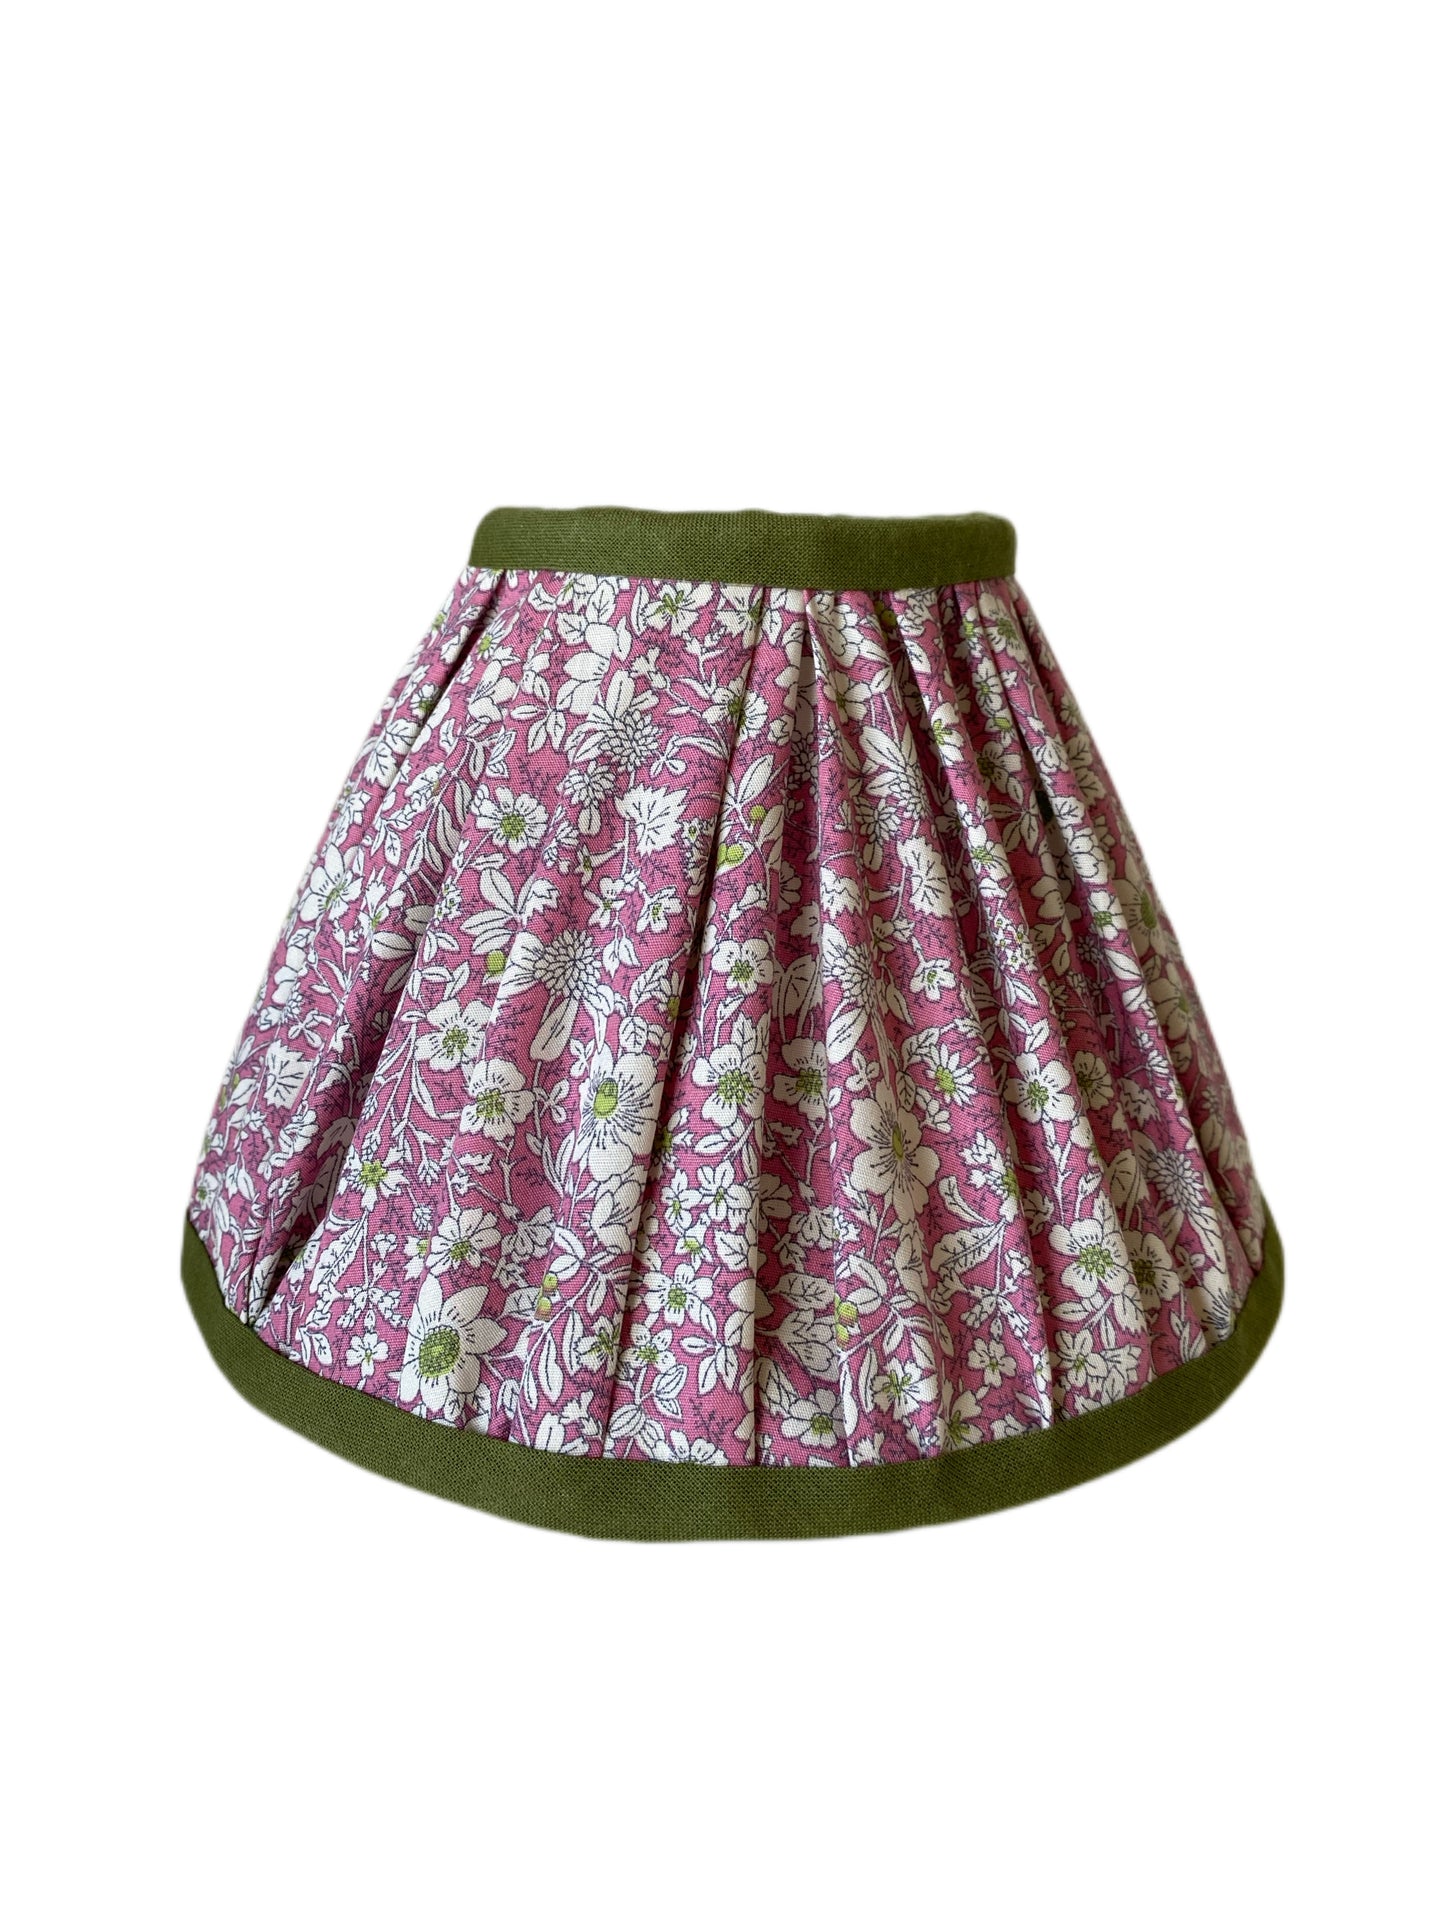 Gathered Pink & Green 20cm Floral Soft Lampshade